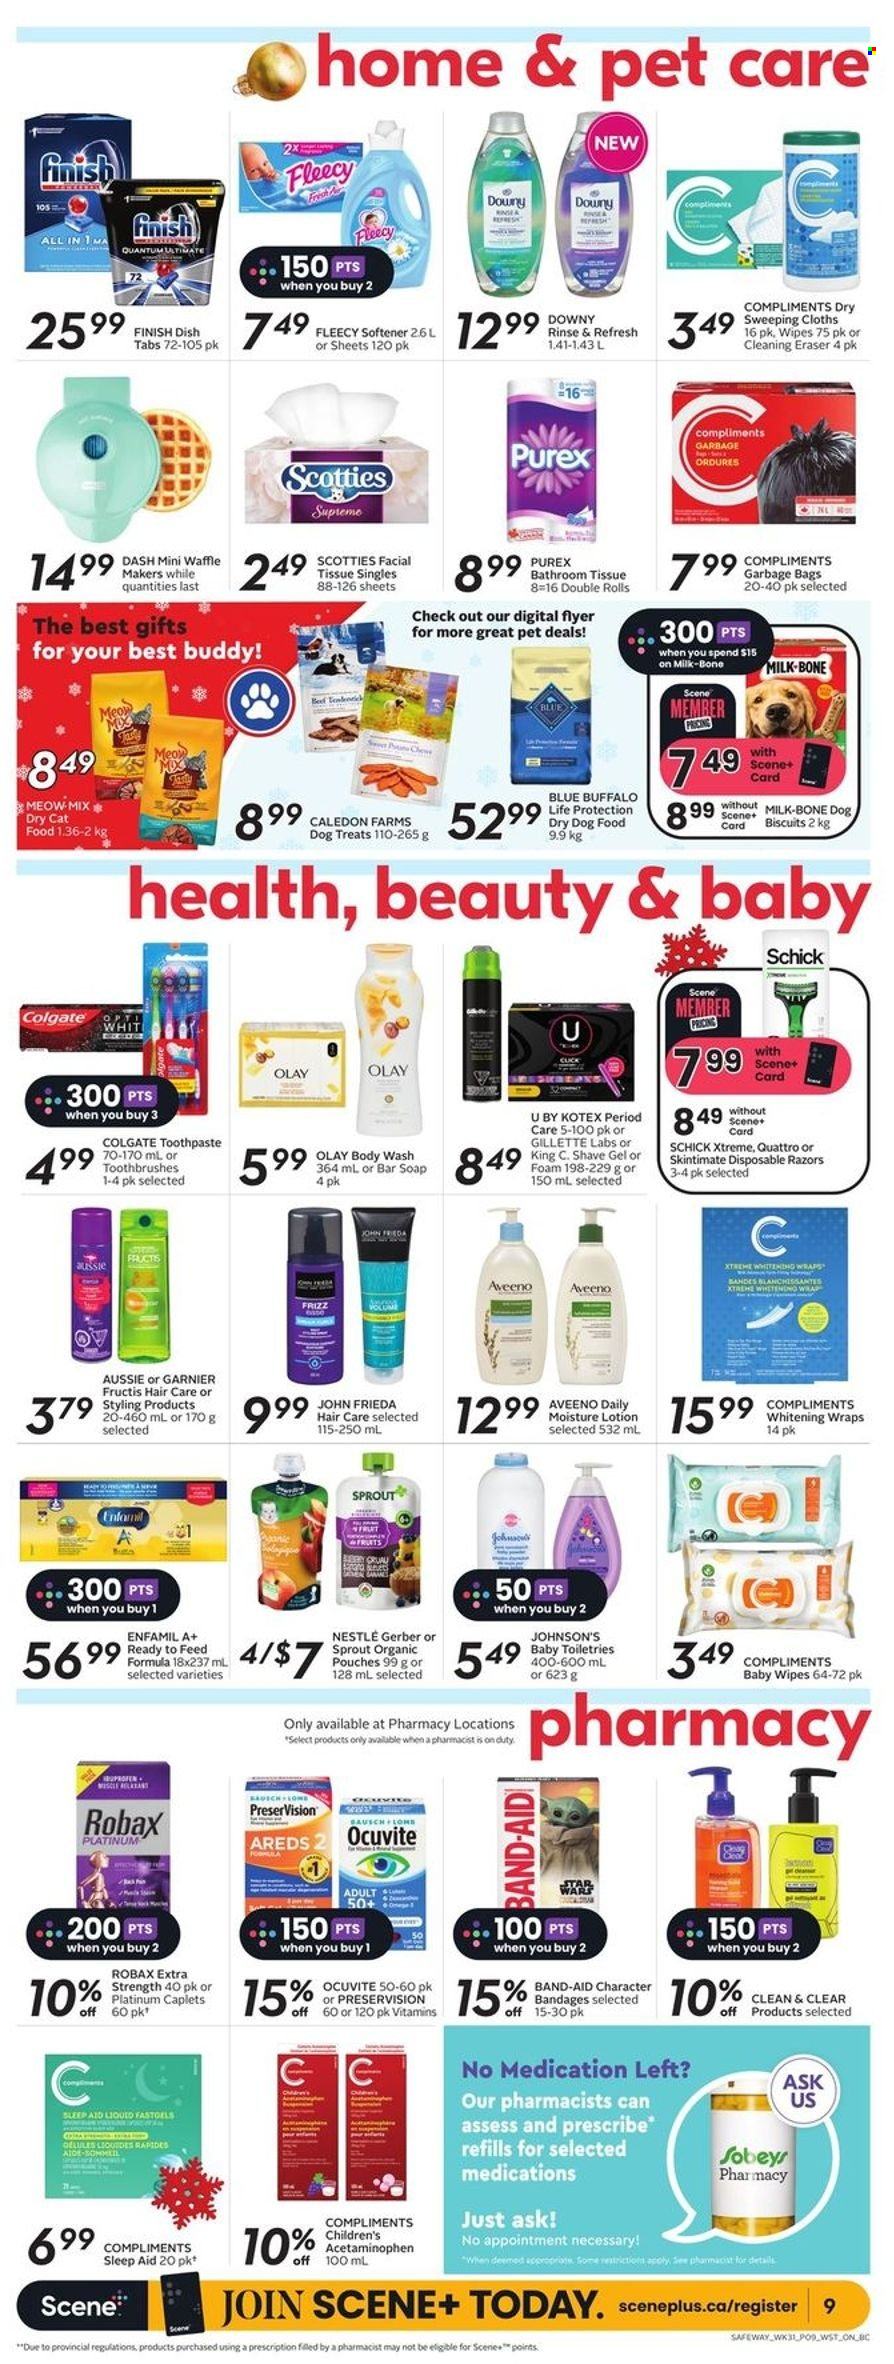 thumbnail - Safeway Flyer - December 01, 2022 - December 07, 2022 - Sales products - wraps, milk, biscuit, Gerber, Enfamil, wipes, baby wipes, Johnson's, Aveeno, bath tissue, fabric softener, Purex, body wash, soap bar, soap, toothpaste, Kotex, Gillette, Olay, Clean & Clear, Aussie, John Frieda, Fructis, body lotion, shave gel, Schick, disposable razor, animal food, Blue Buffalo, cat food, dog food, dry dog food, dry cat food, band-aid, Colgate, Garnier, Nestlé, Ocuvite. Page 11.